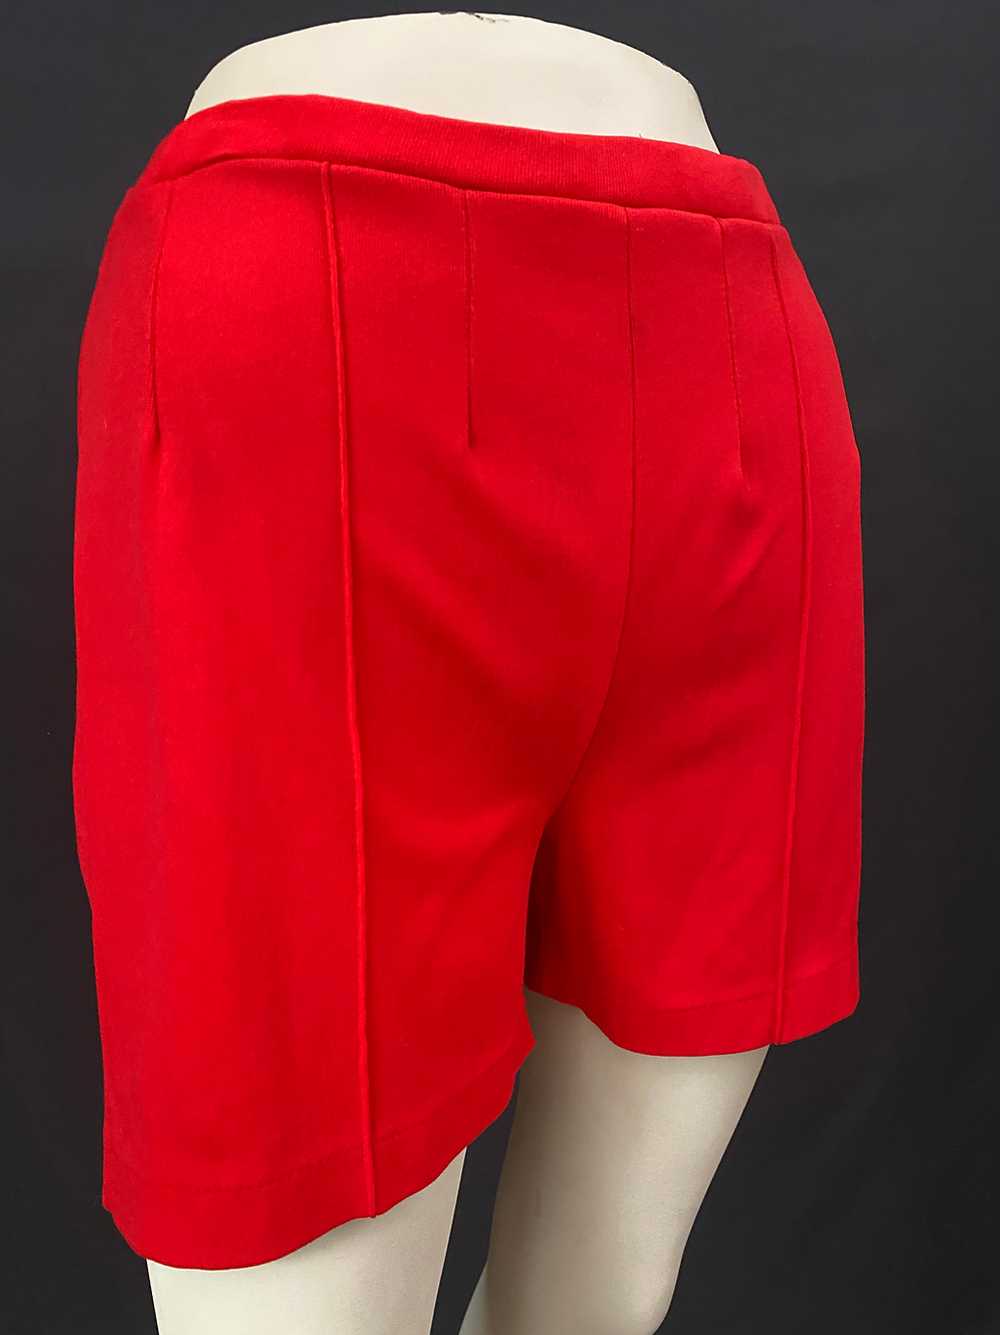 60s/70s Red Mod Pull On Shorts - image 4